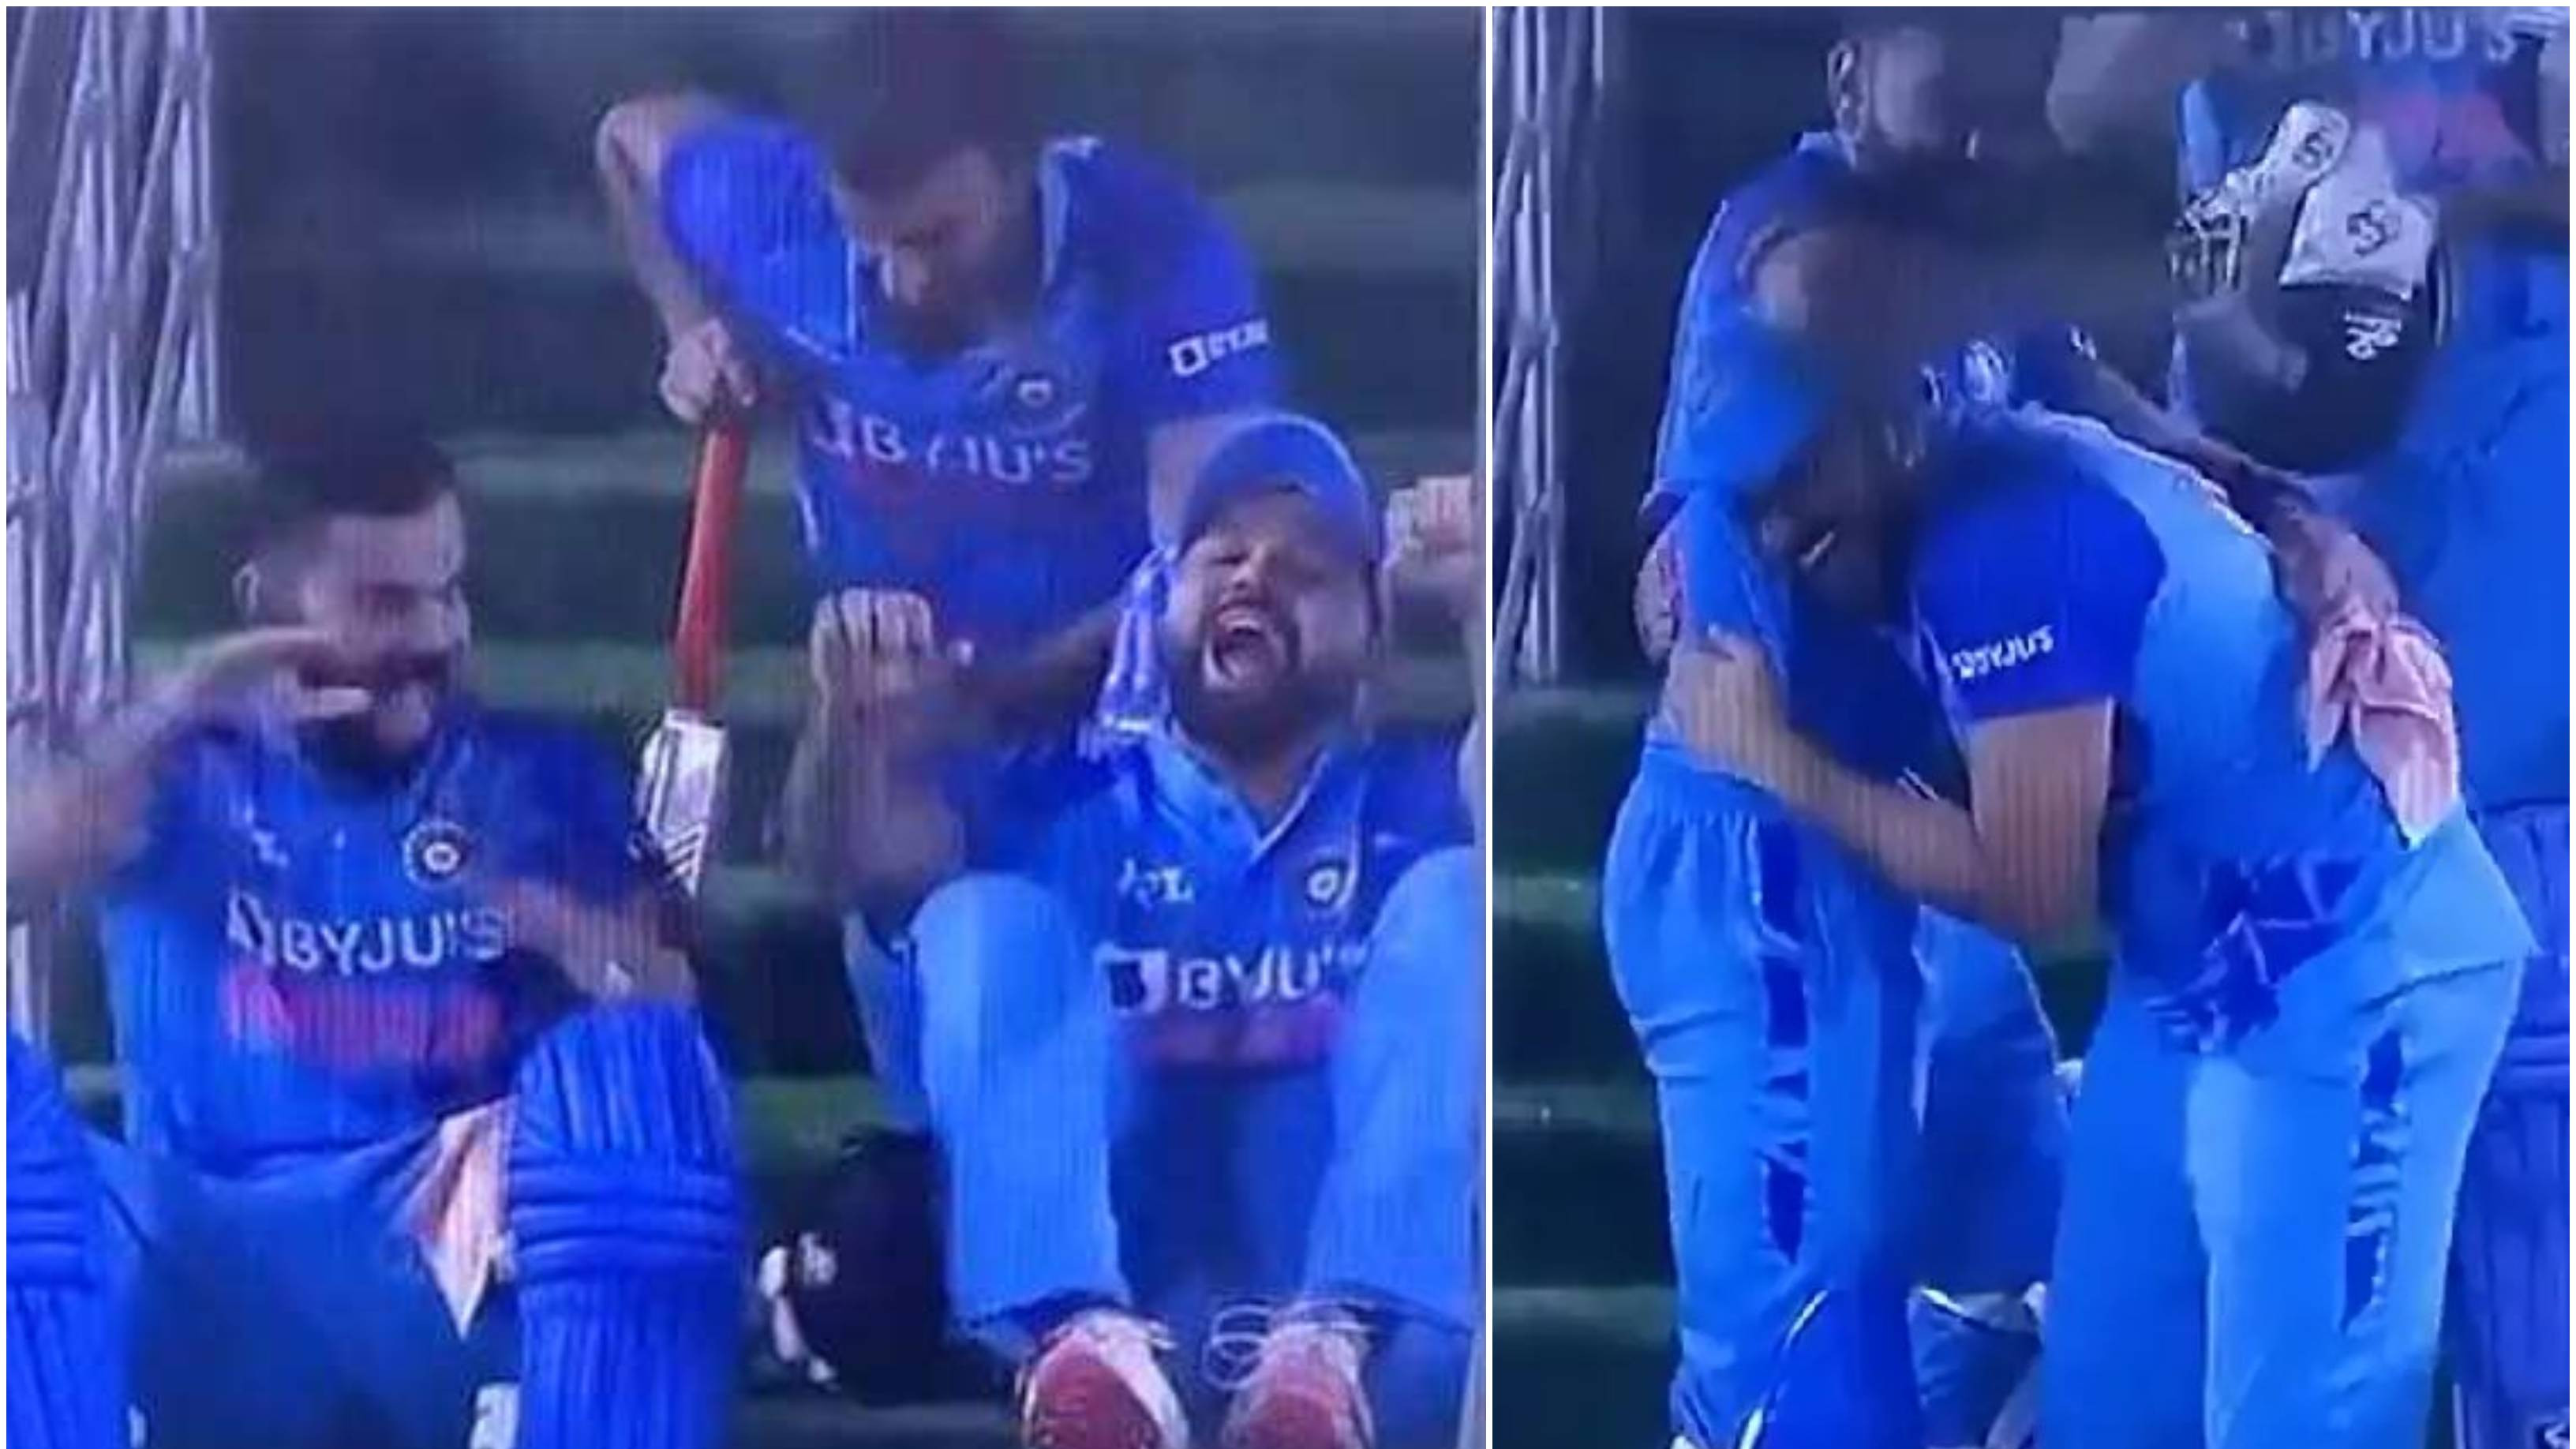 IND v AUS 2022: WATCH – Virat Kohli and Rohit Sharma’s childlike celebration after India’s series-clinching win in 3rd T20I